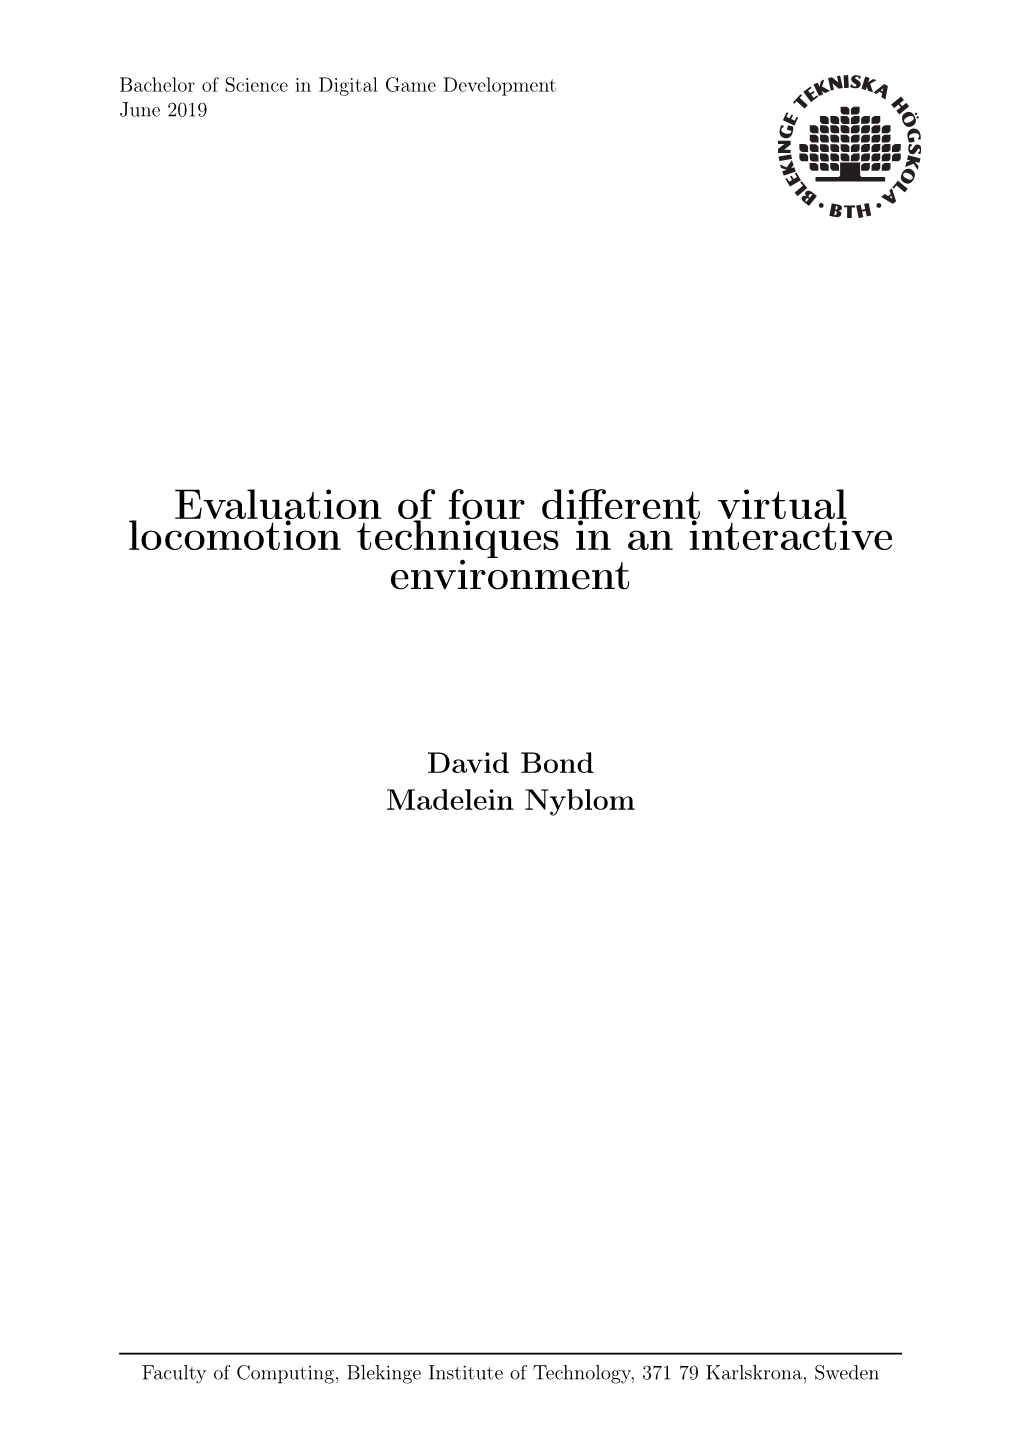 Evaluation of Four Different Virtual Locomotion Techniques in An